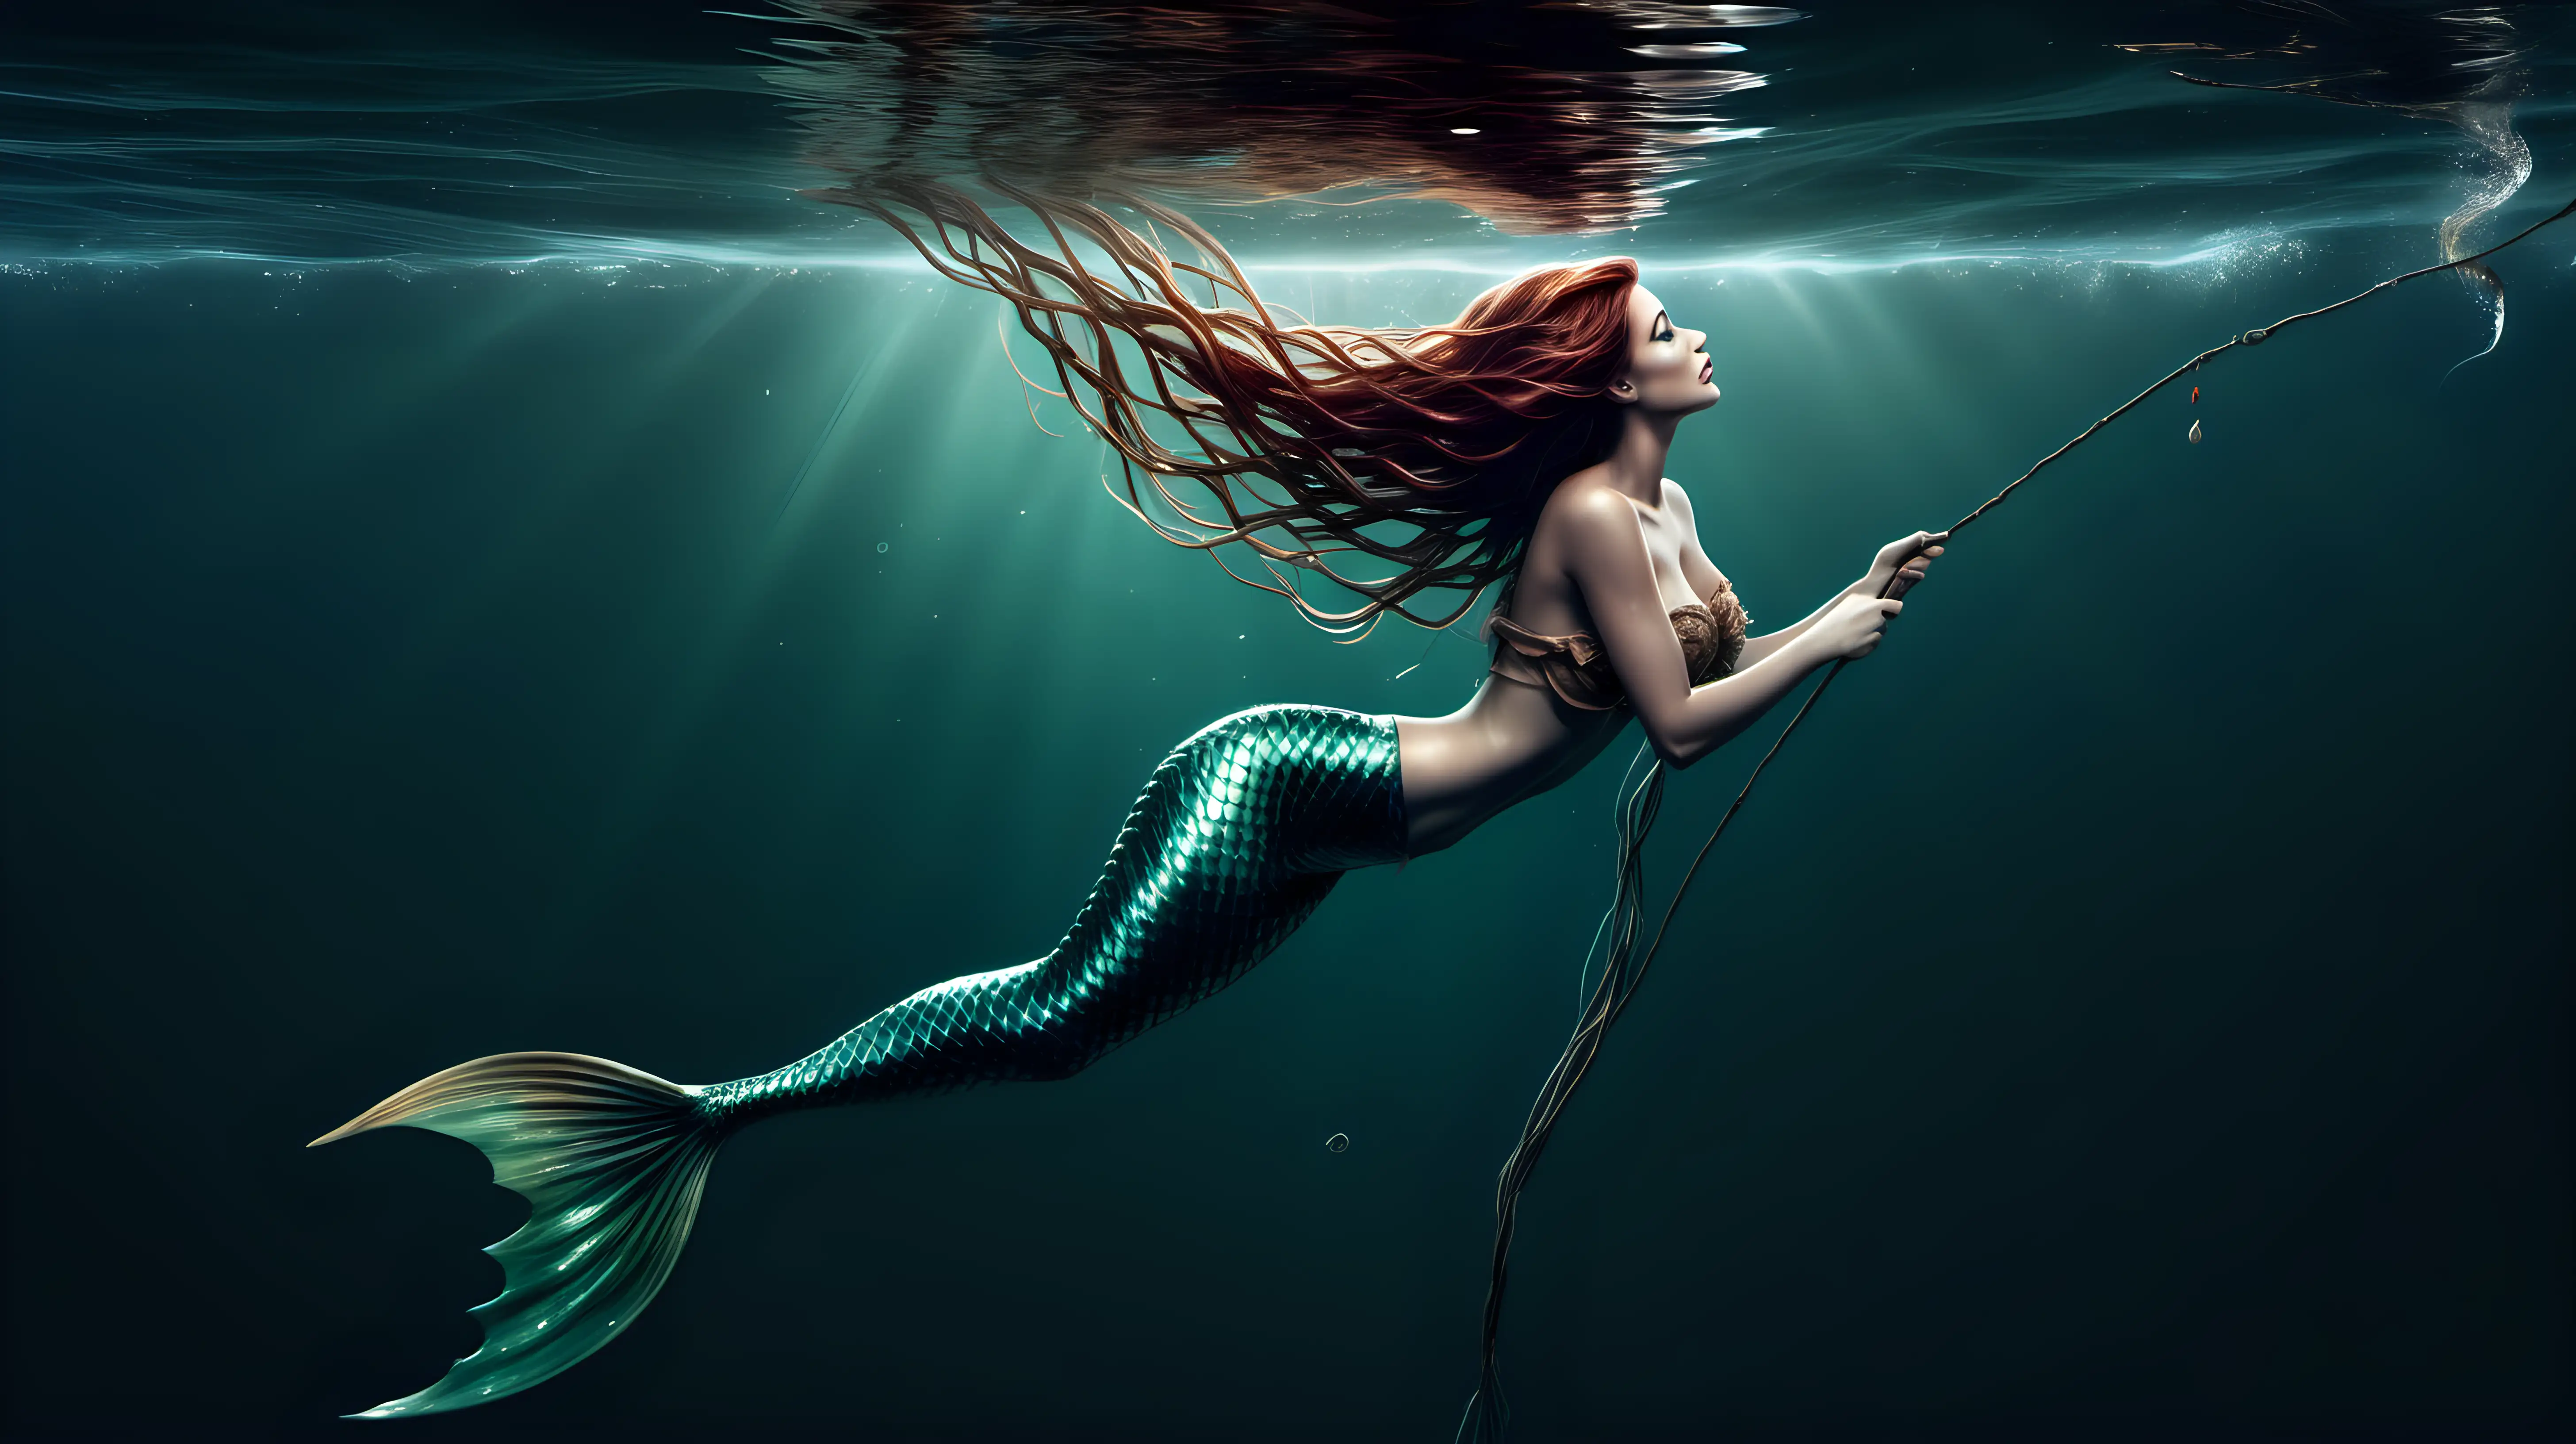 
mermaid half out of water.  you can be seen  that she is tangle up in fishing line struggling to get out.  you can see her body below the water line and he upper half above the water